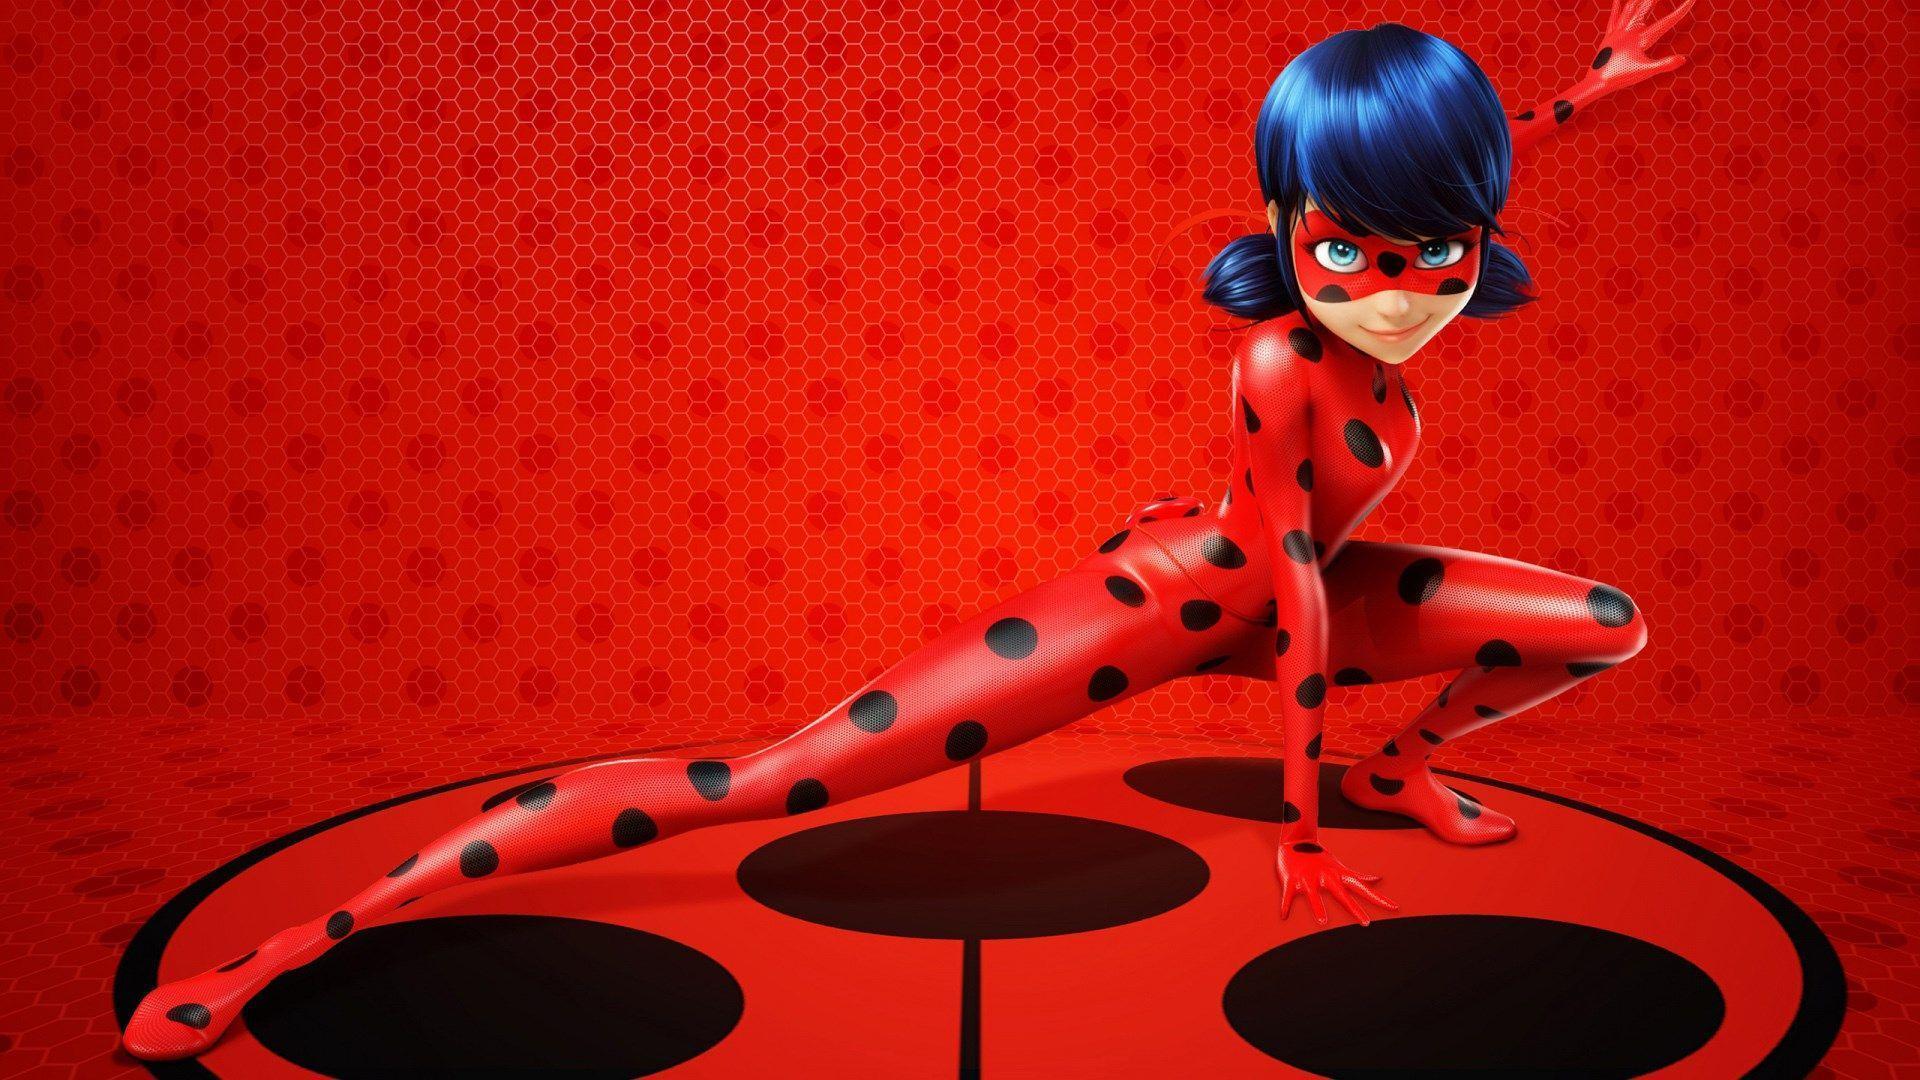 miraculous tales of ladybug and cat noir wallpapers and backgrounds.